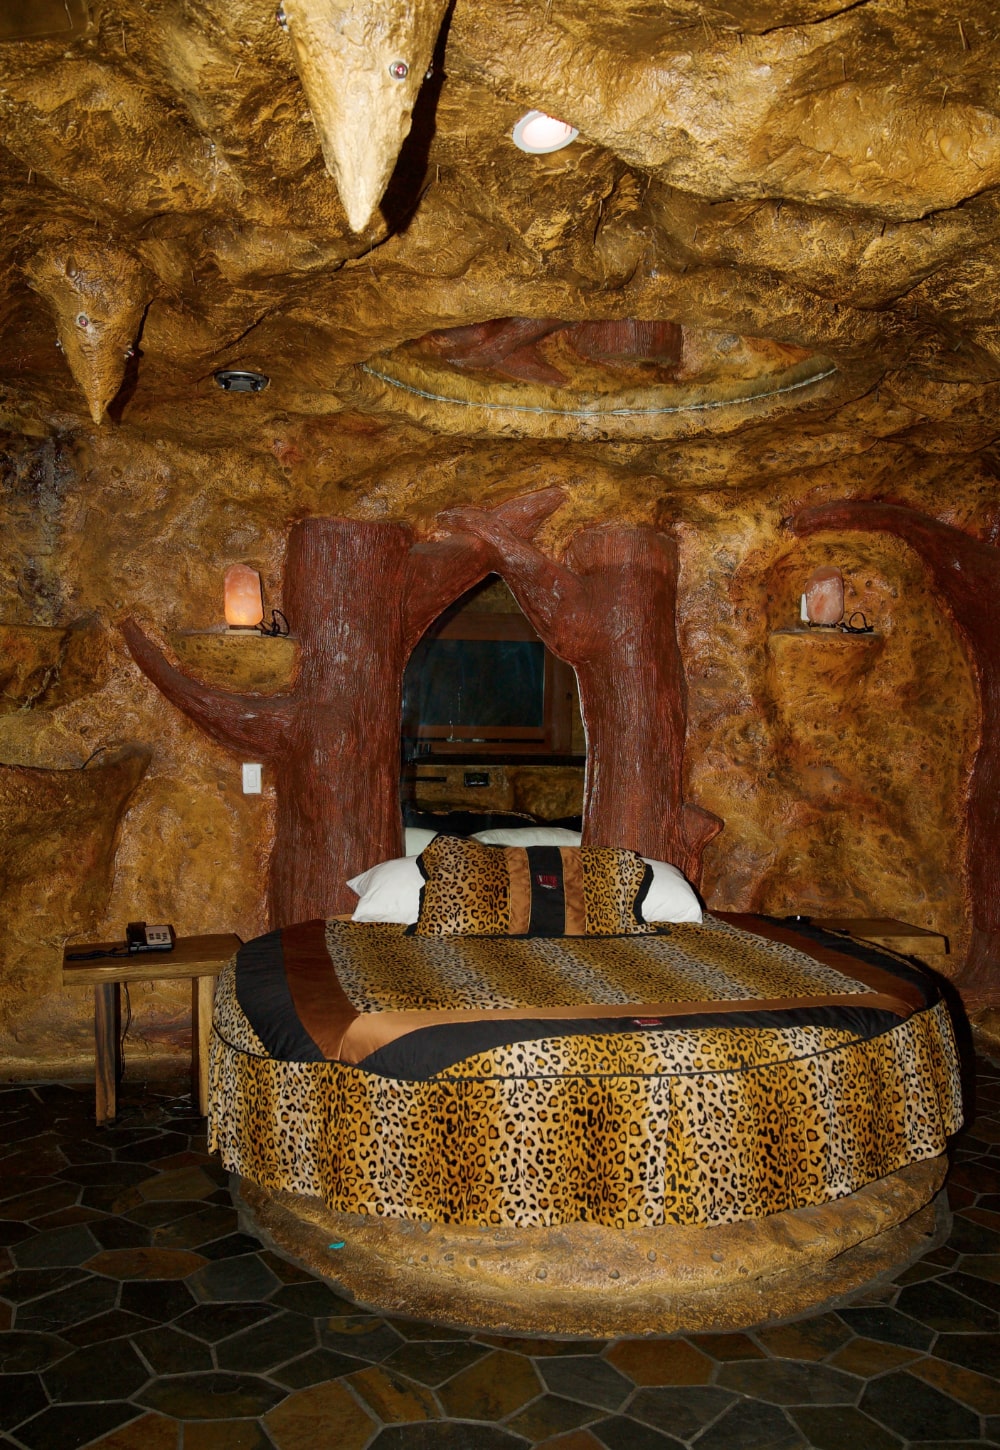 Top 10 weirdest hotels with A Pretty Cool Hotel Tour